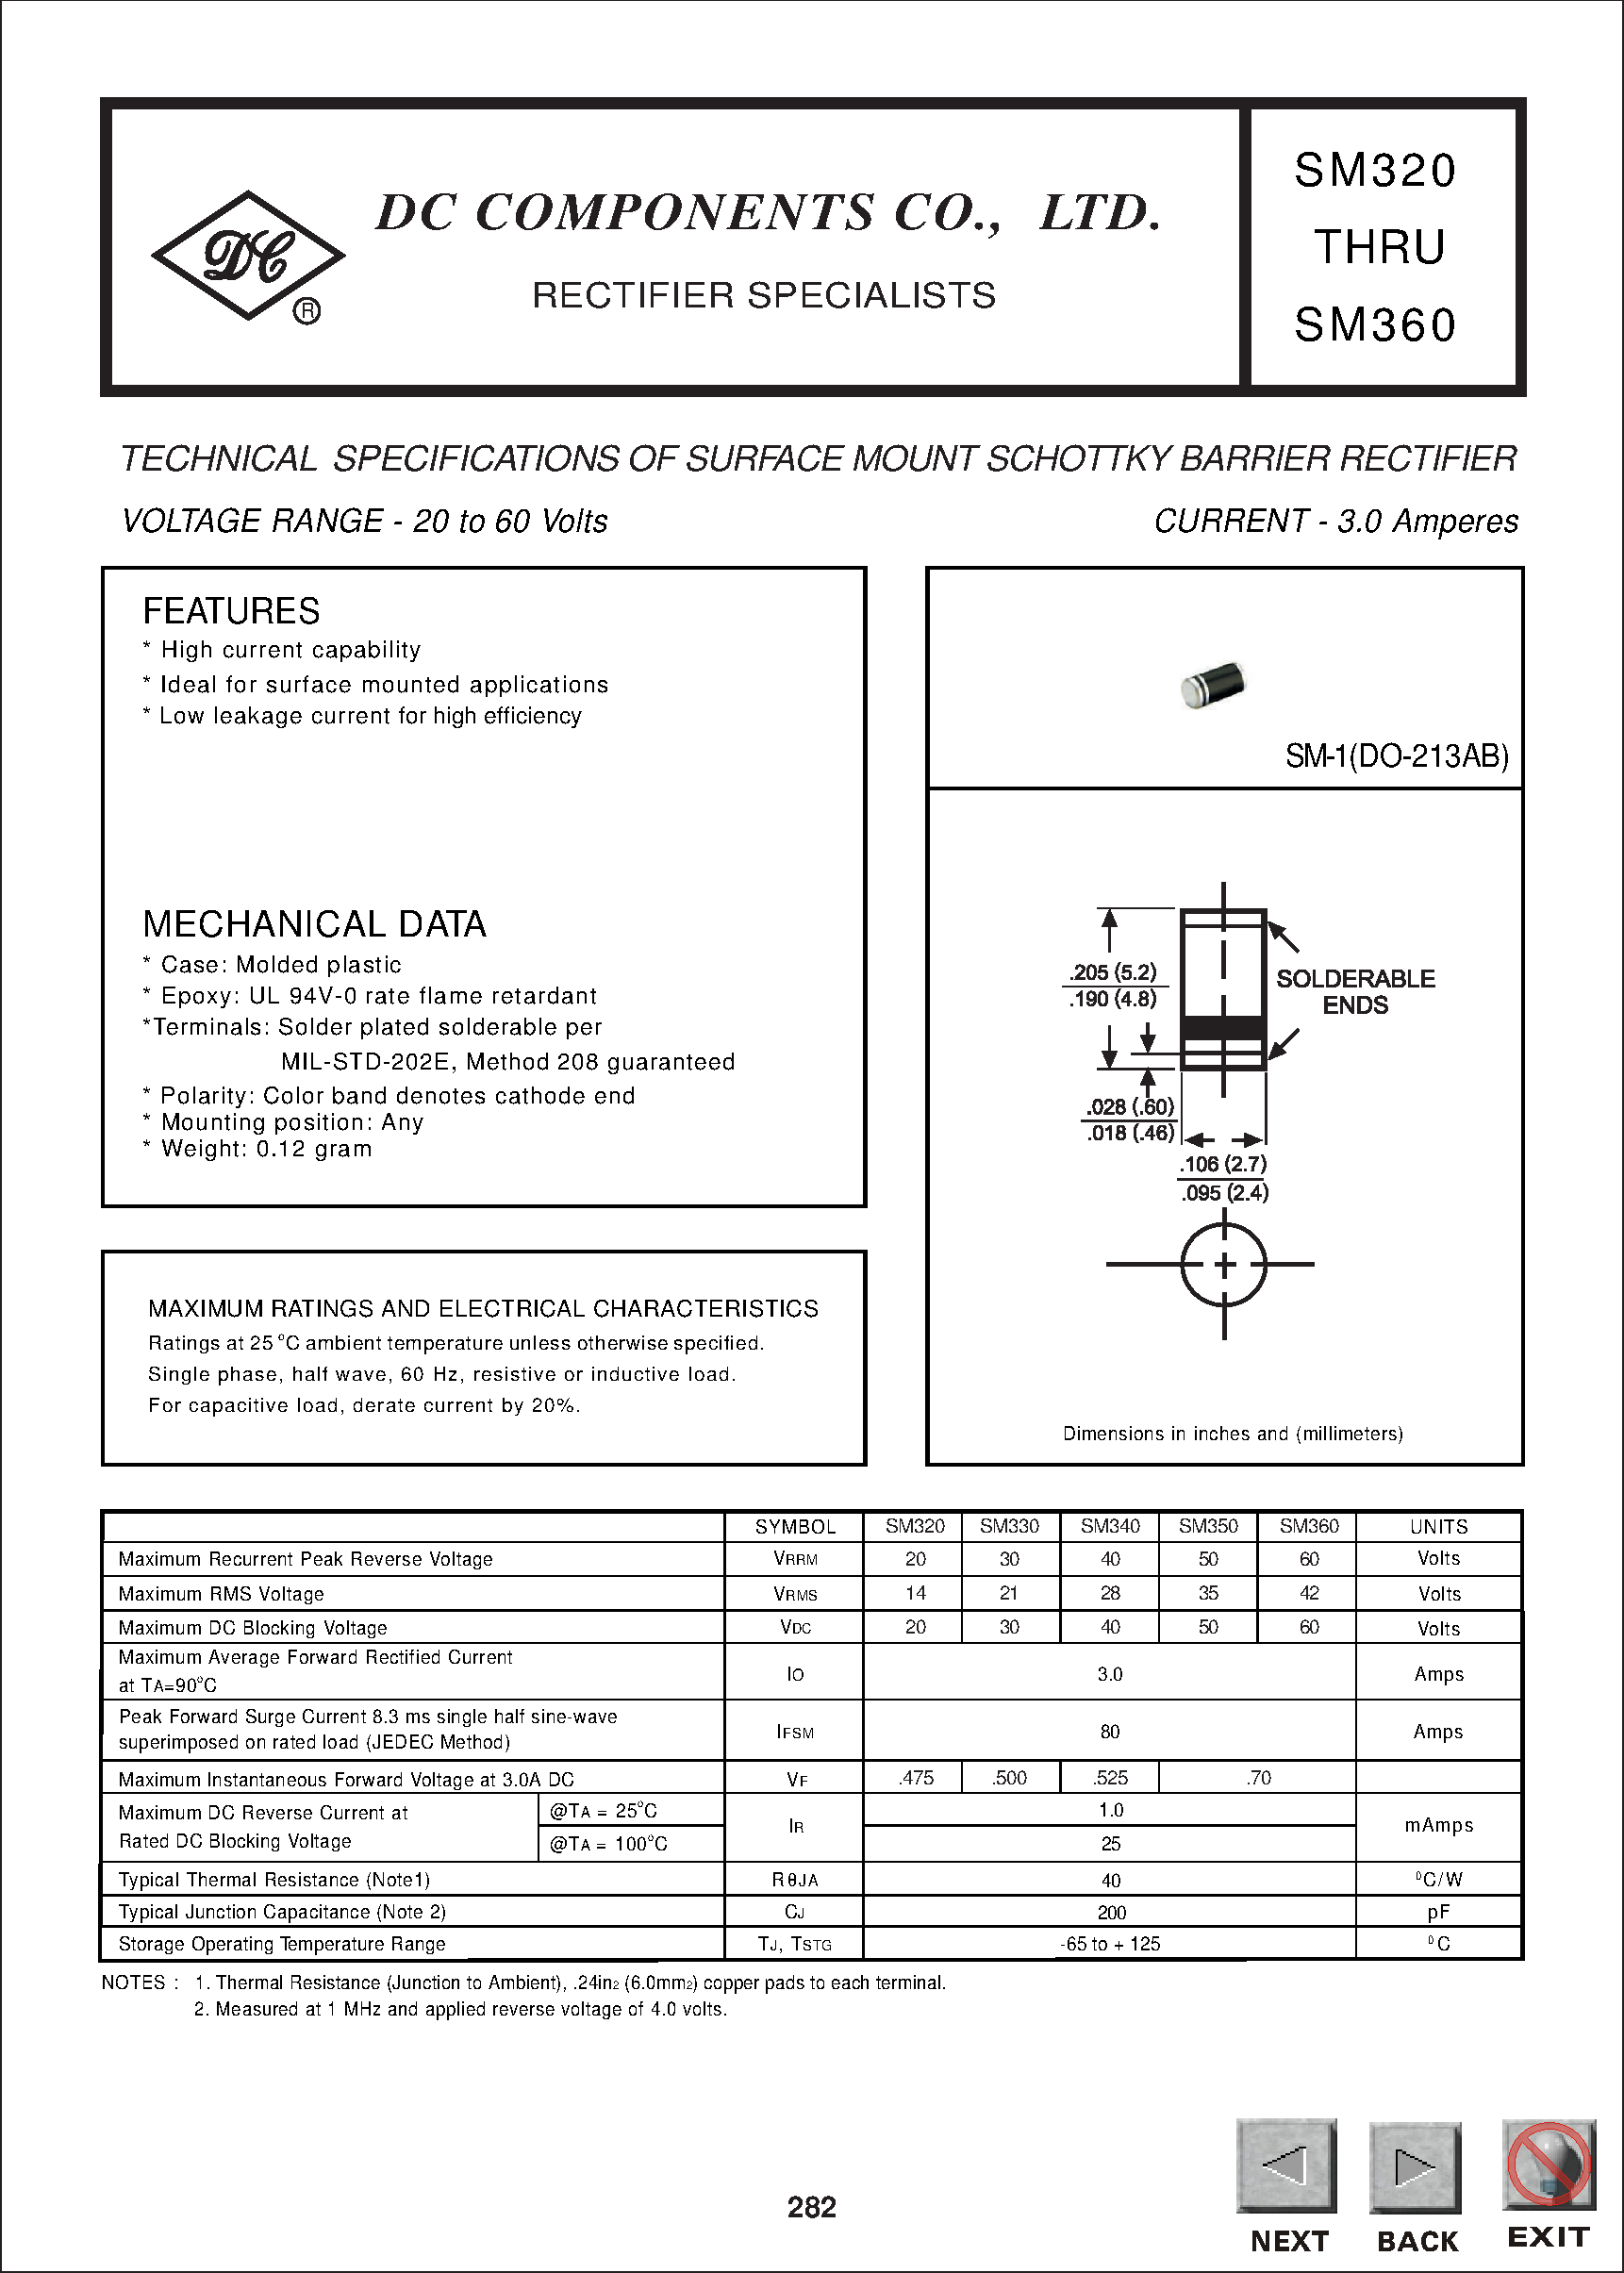 Datasheet SM320 - TECHNICAL SPECIFICATIONS OF SURFACE MOUNT SCHOTTKY BARRIER RECTIFIER page 1